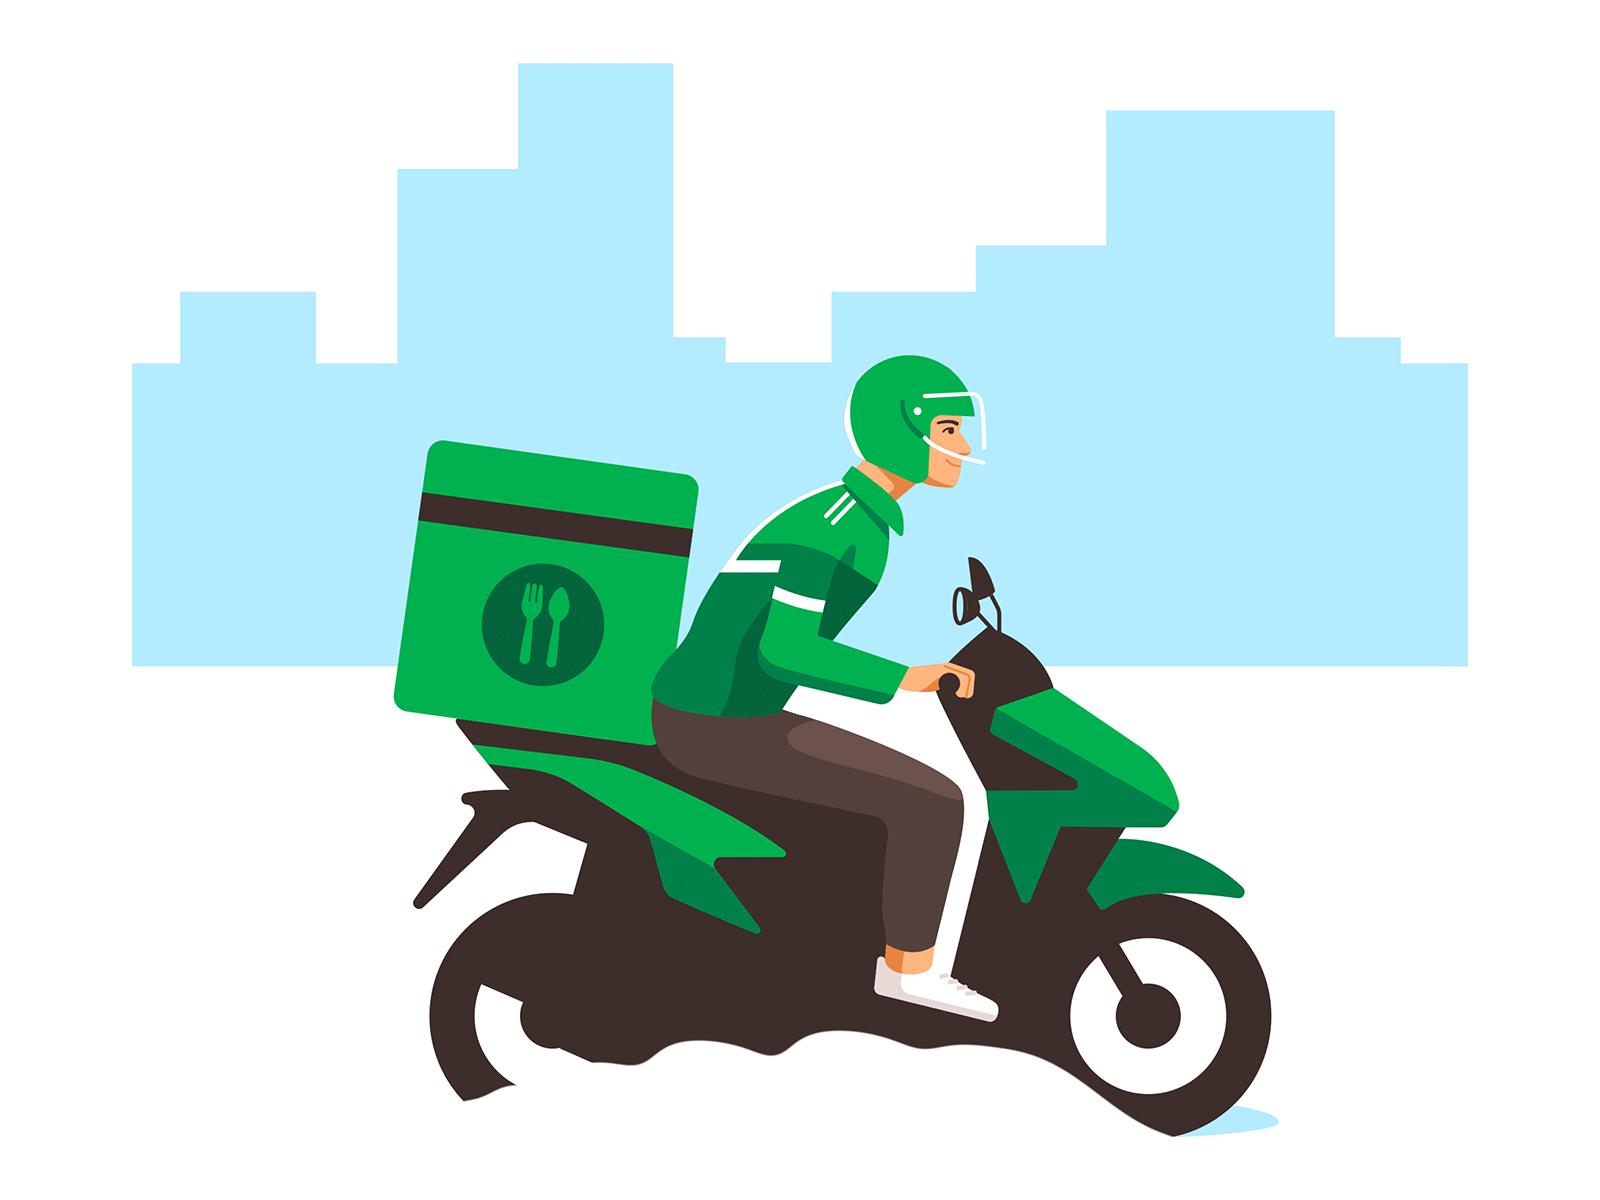 Driving Illustration Forward 🏍 by Siow Jun for Grab on Dribbble